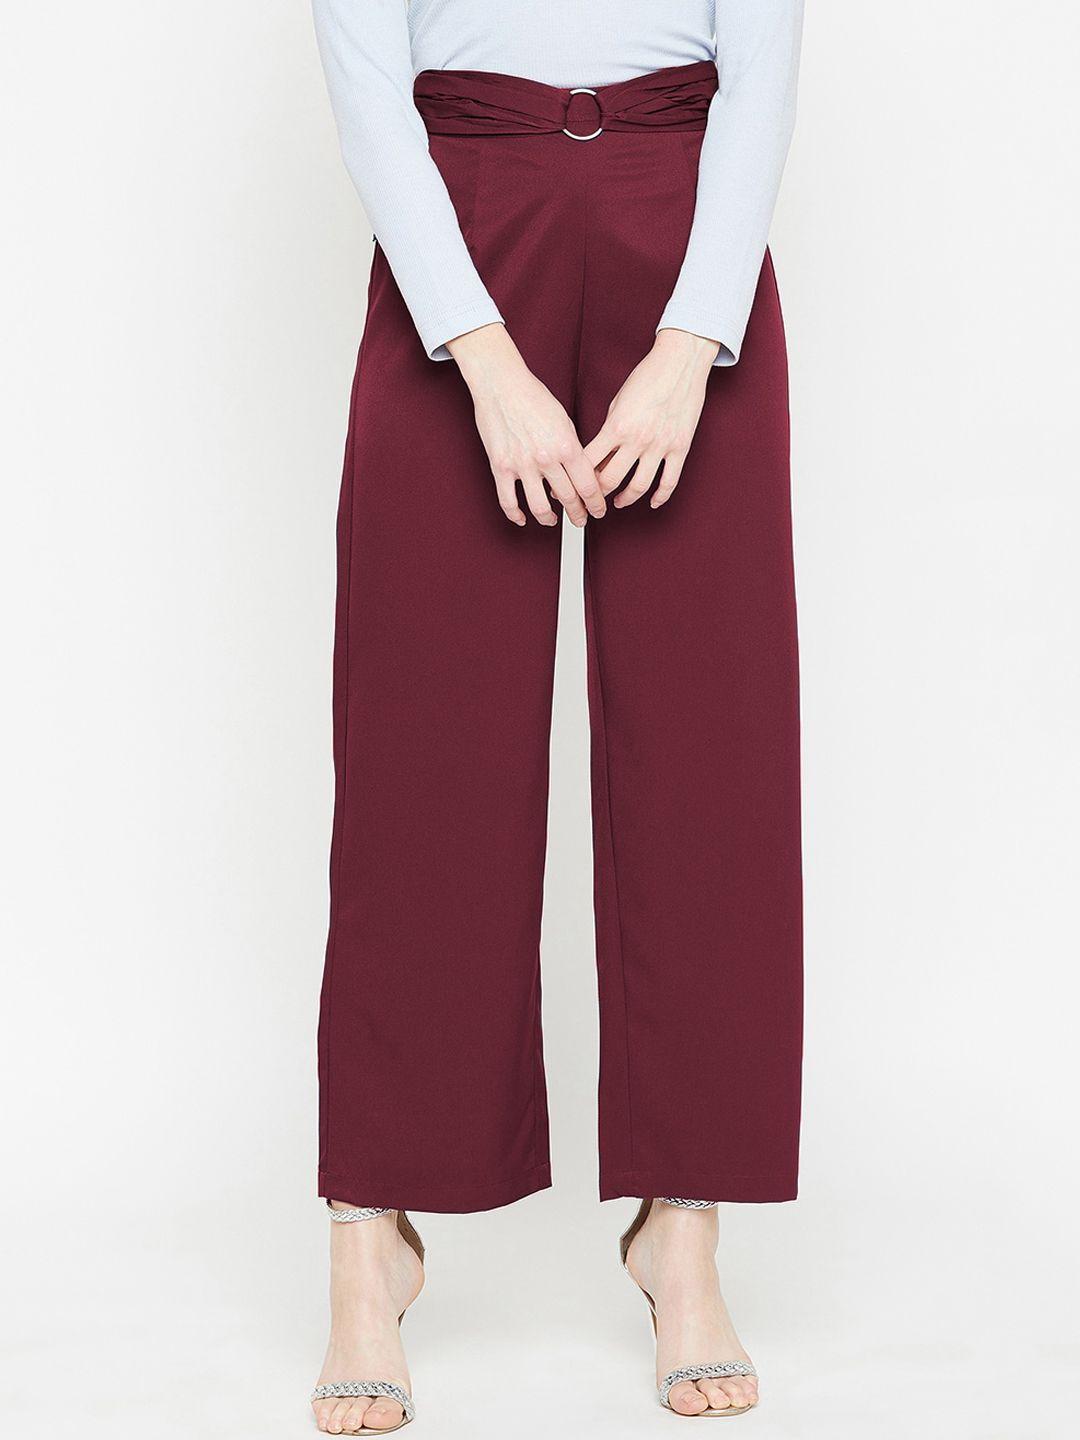 marie claire women high-rise parallel trousers